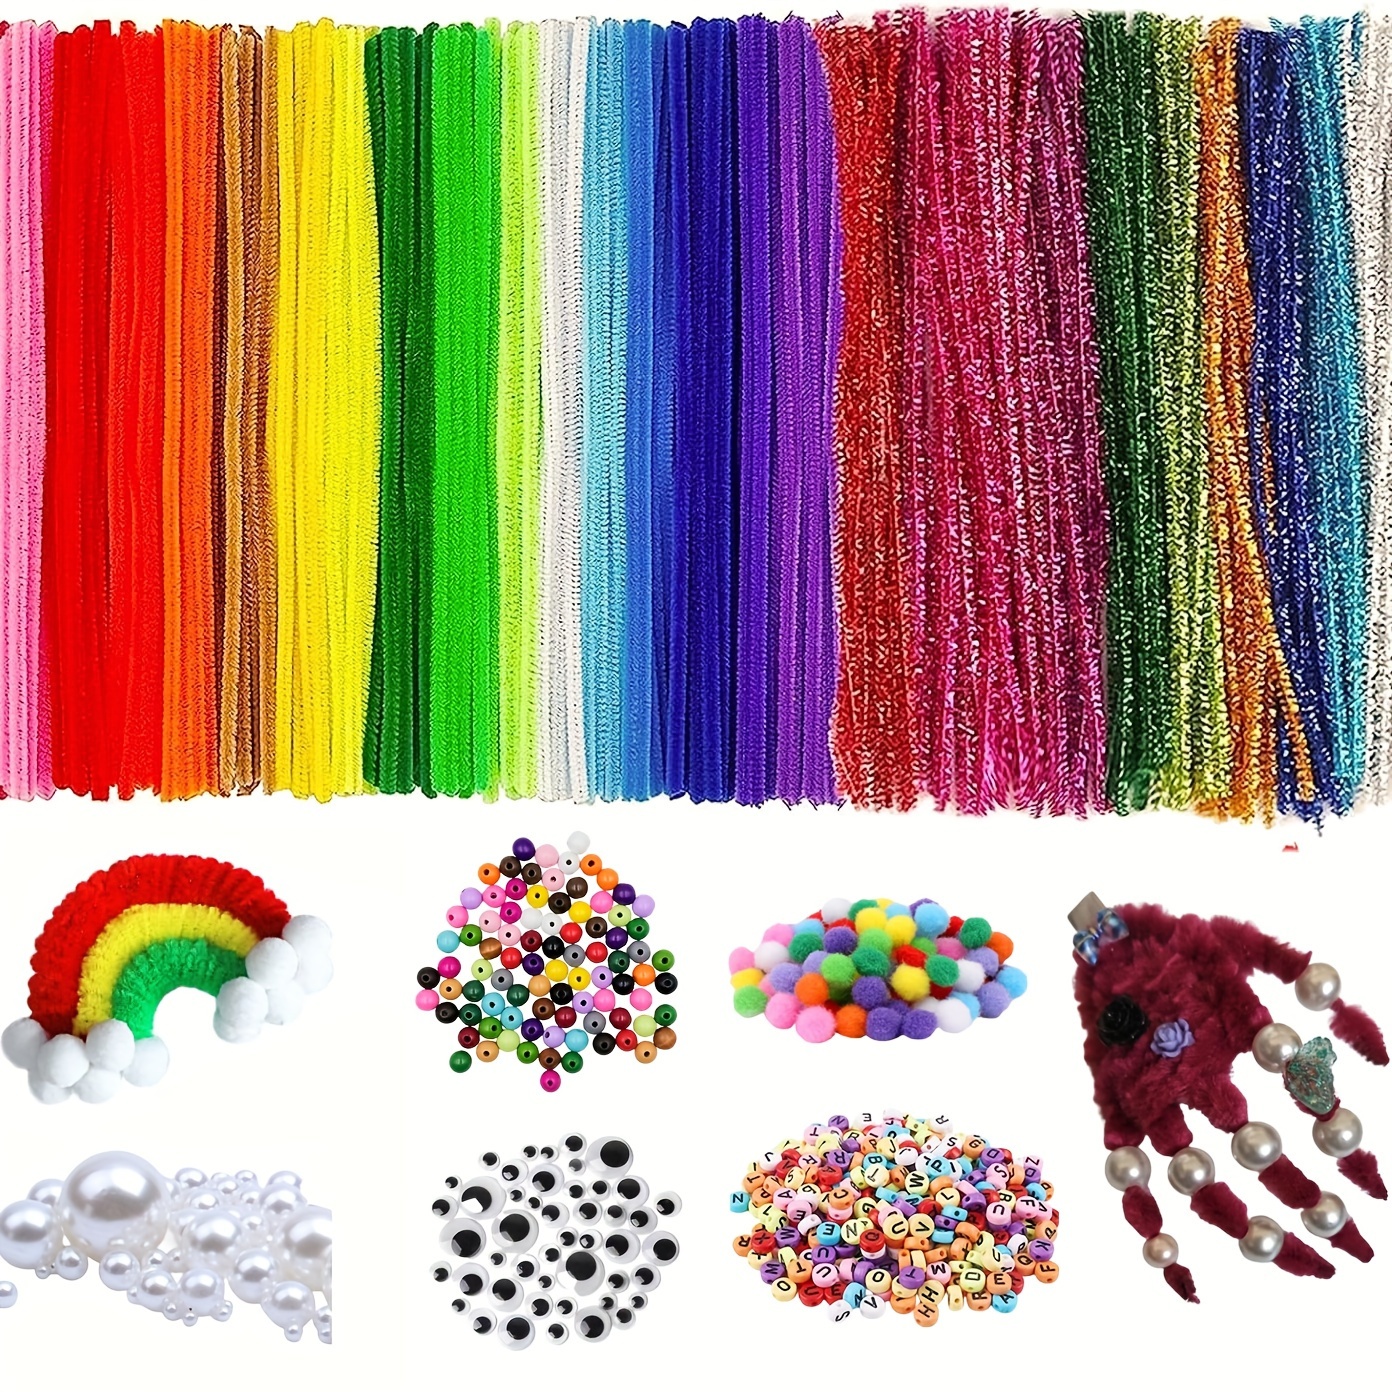 Pipe Cleaners Craft Set with DIY Tutorial, Included 200pcs Multicolor Pipe Cleaners Chenille Stems, 200pcs Pom Poms, 200pcs Self-sticking Wiggle